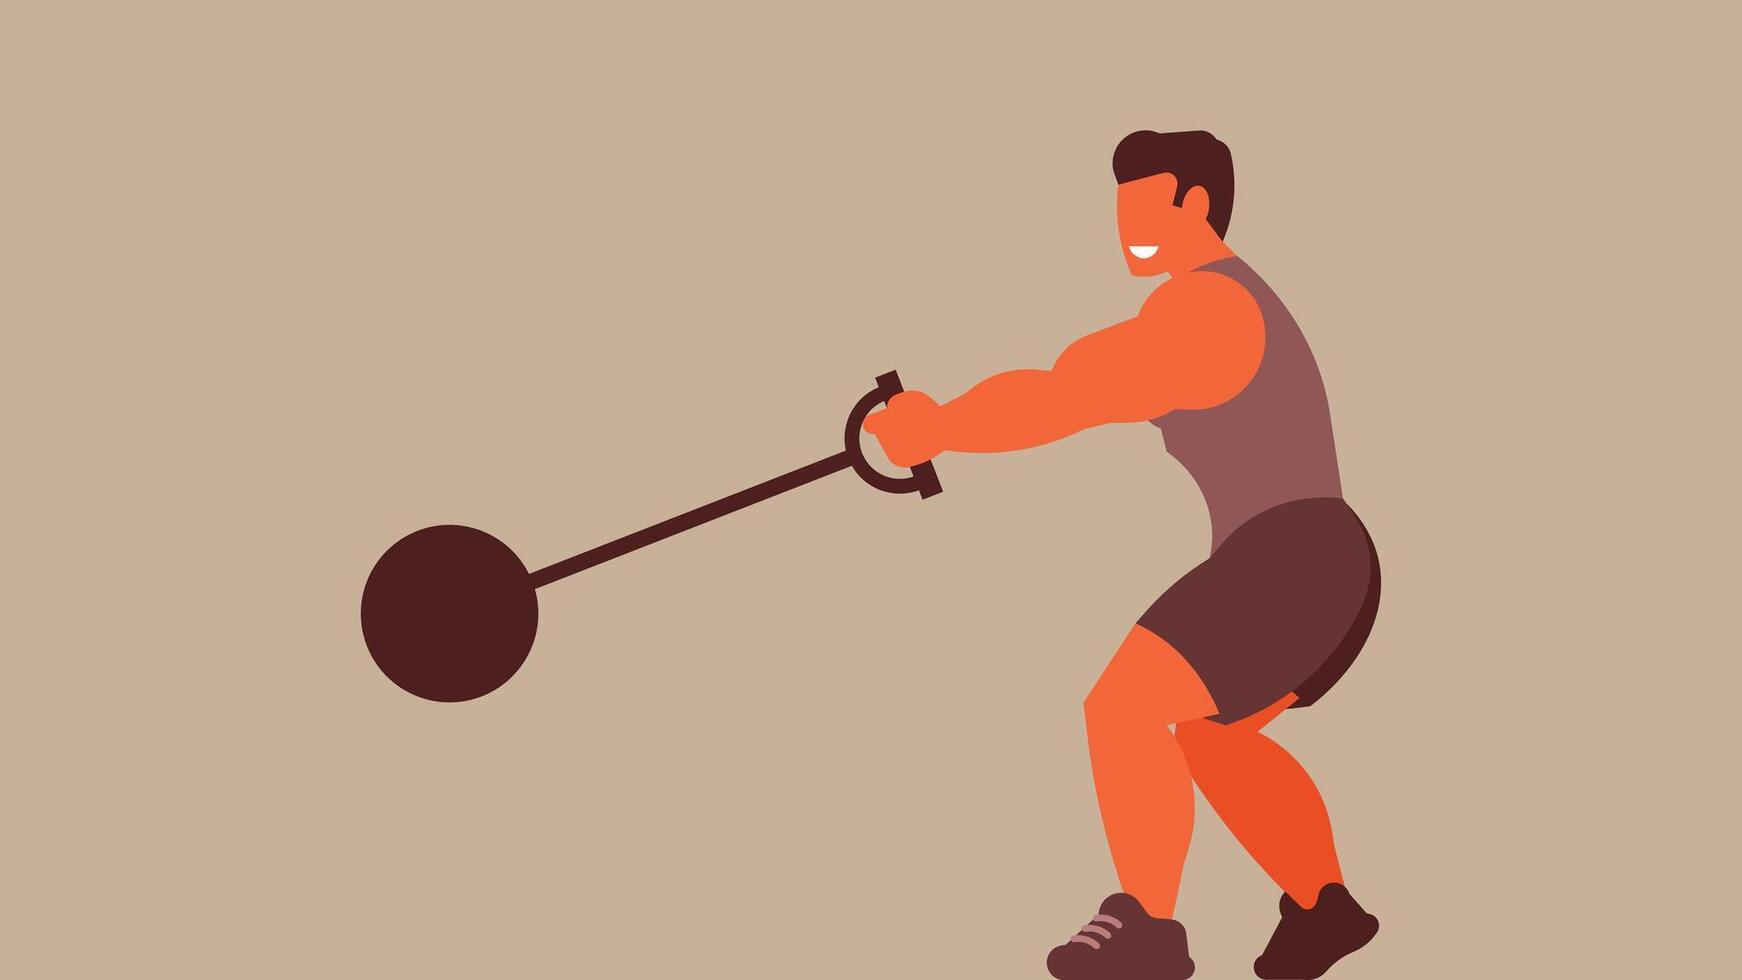 Athlete workout and winning a competition vector illustration